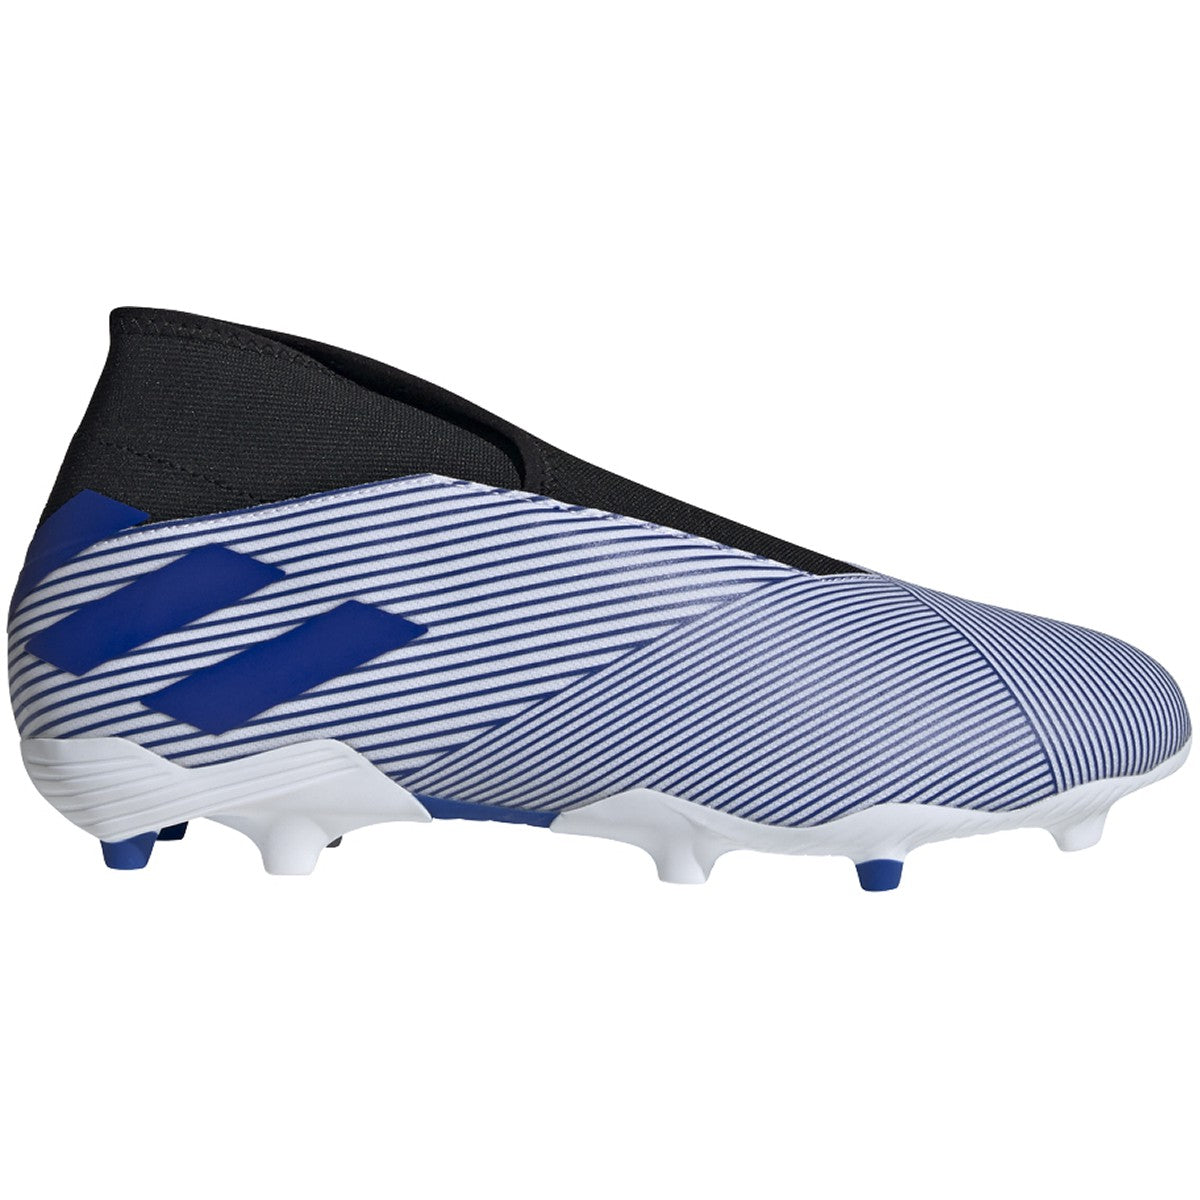 laceless cleats